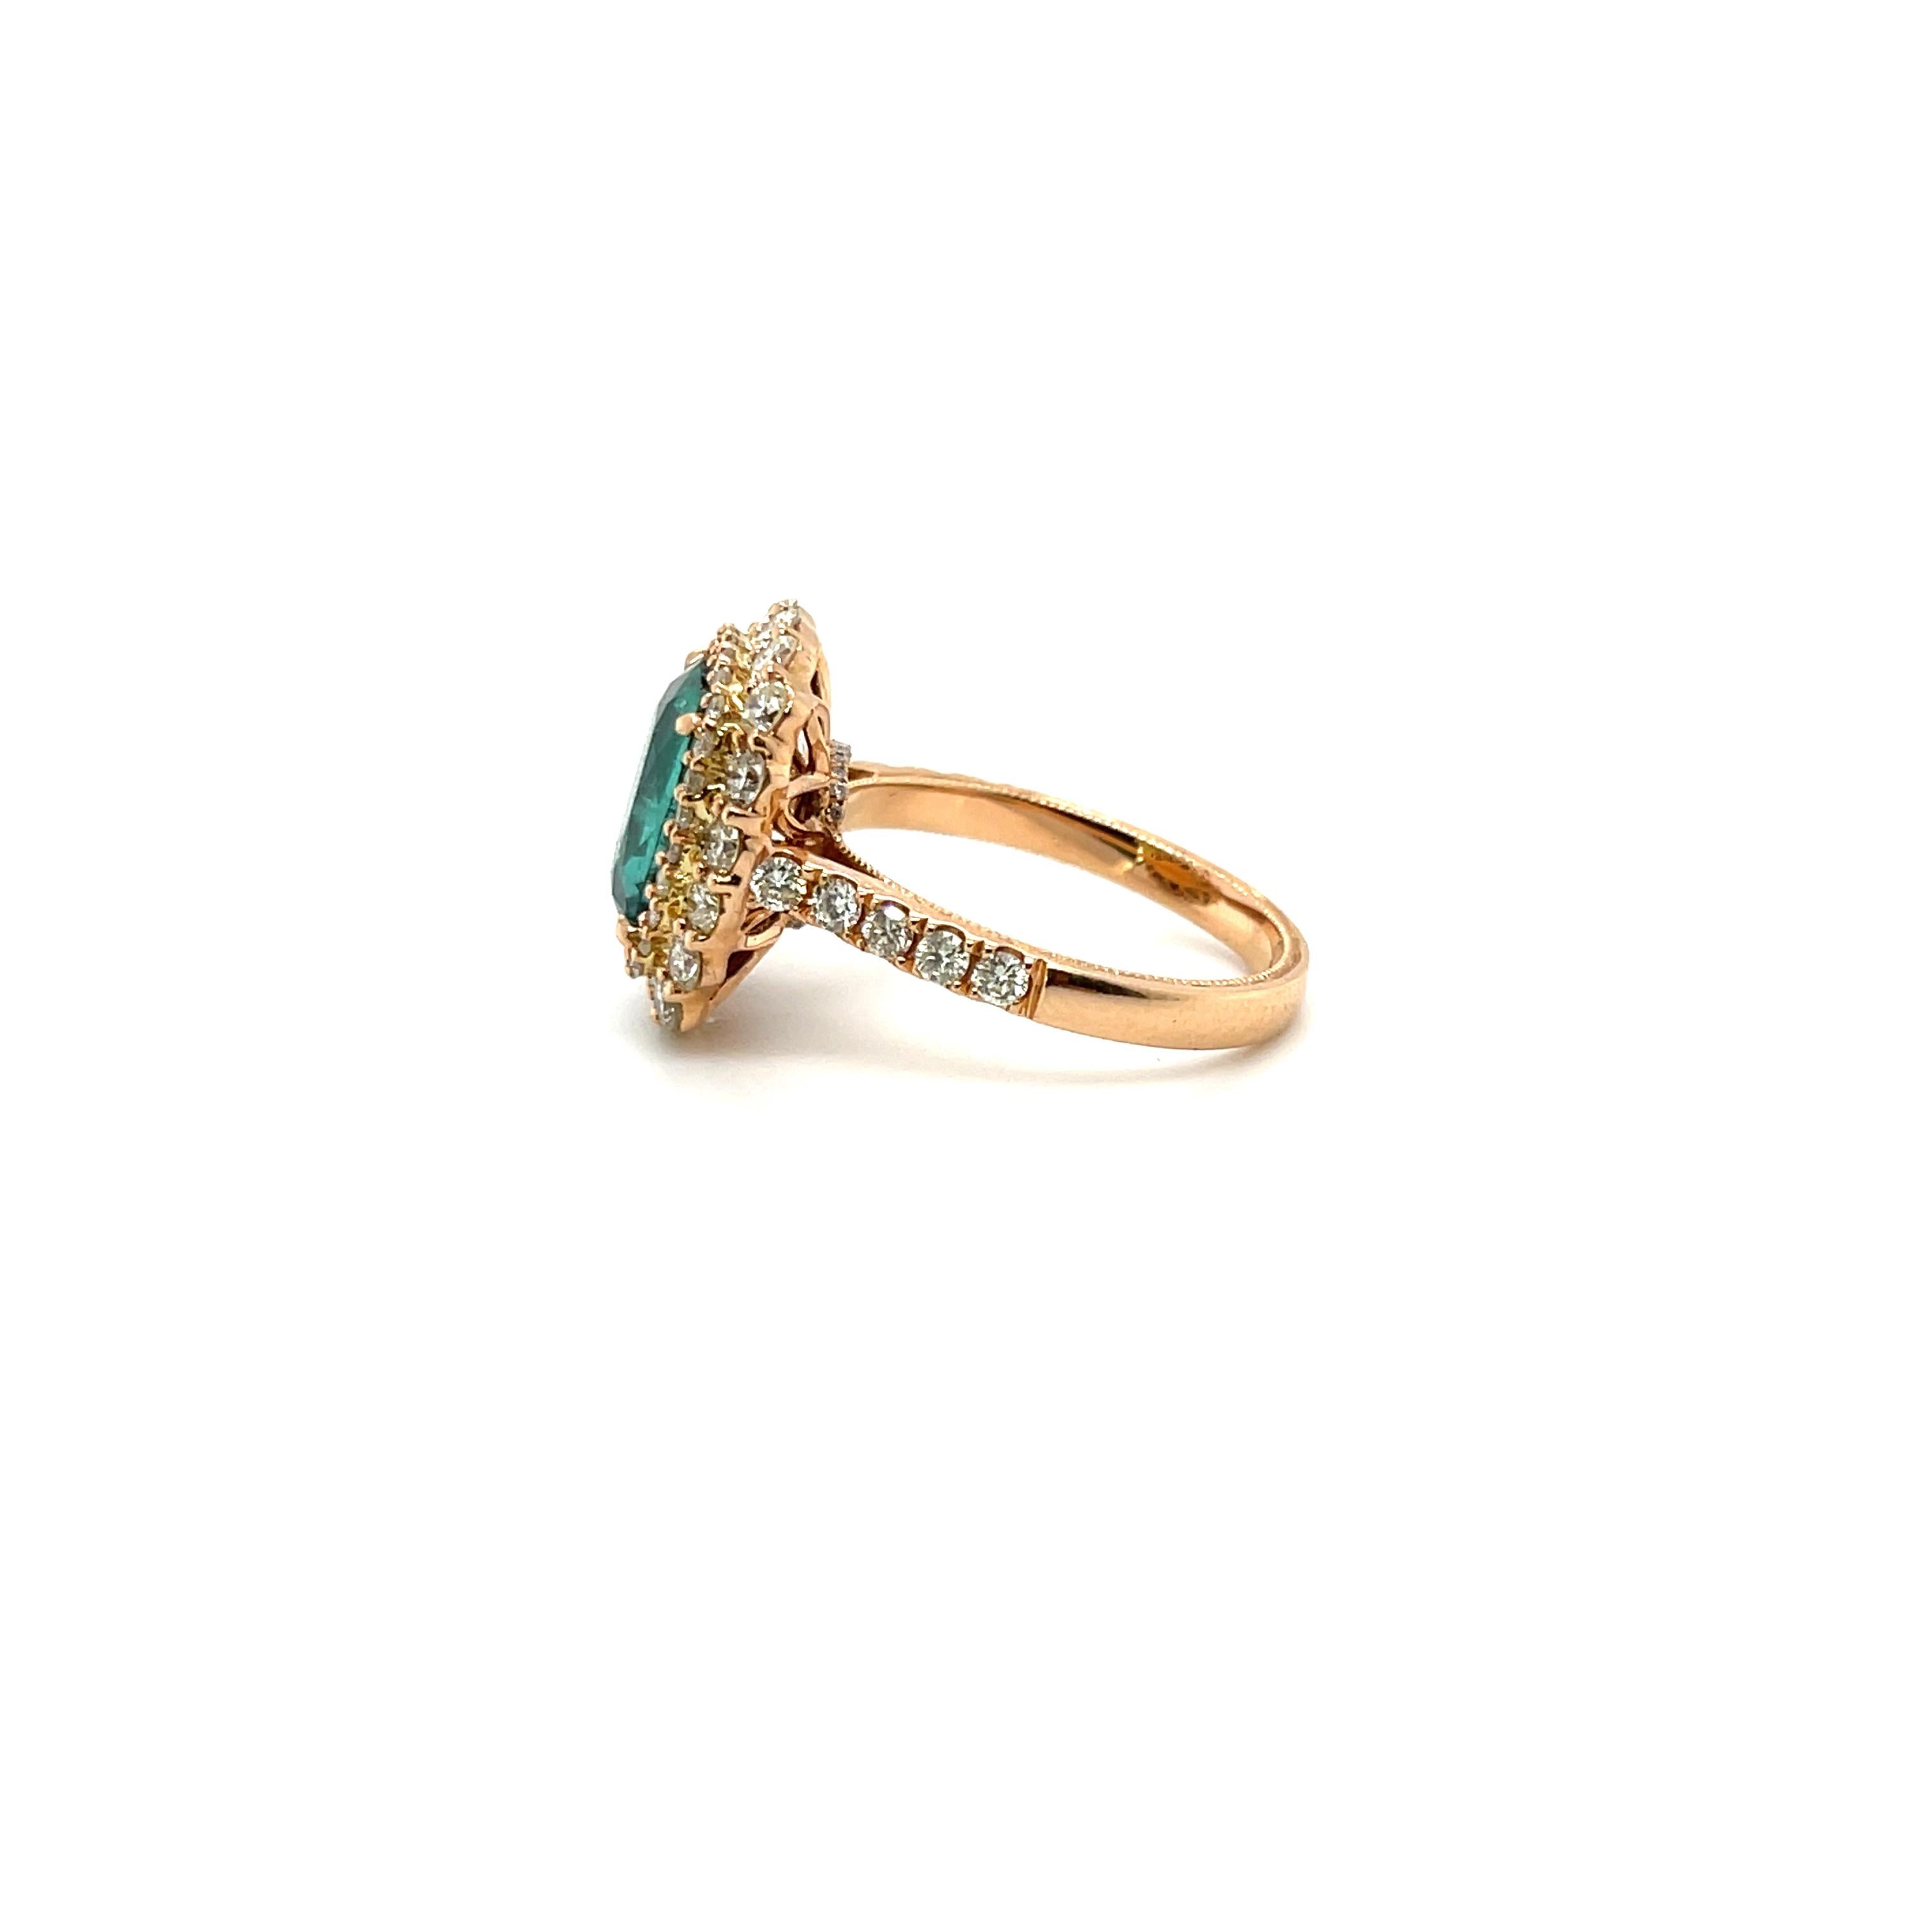 Gorgeous Double Halo Emerald and Diamond ring, gorgeously crafted in eighteen karat rose gold , complimented by a stunning polished finish design.

Purpose of appraisal: Retail replacement value for insurance purposes


Item: One stamped 18CT rose